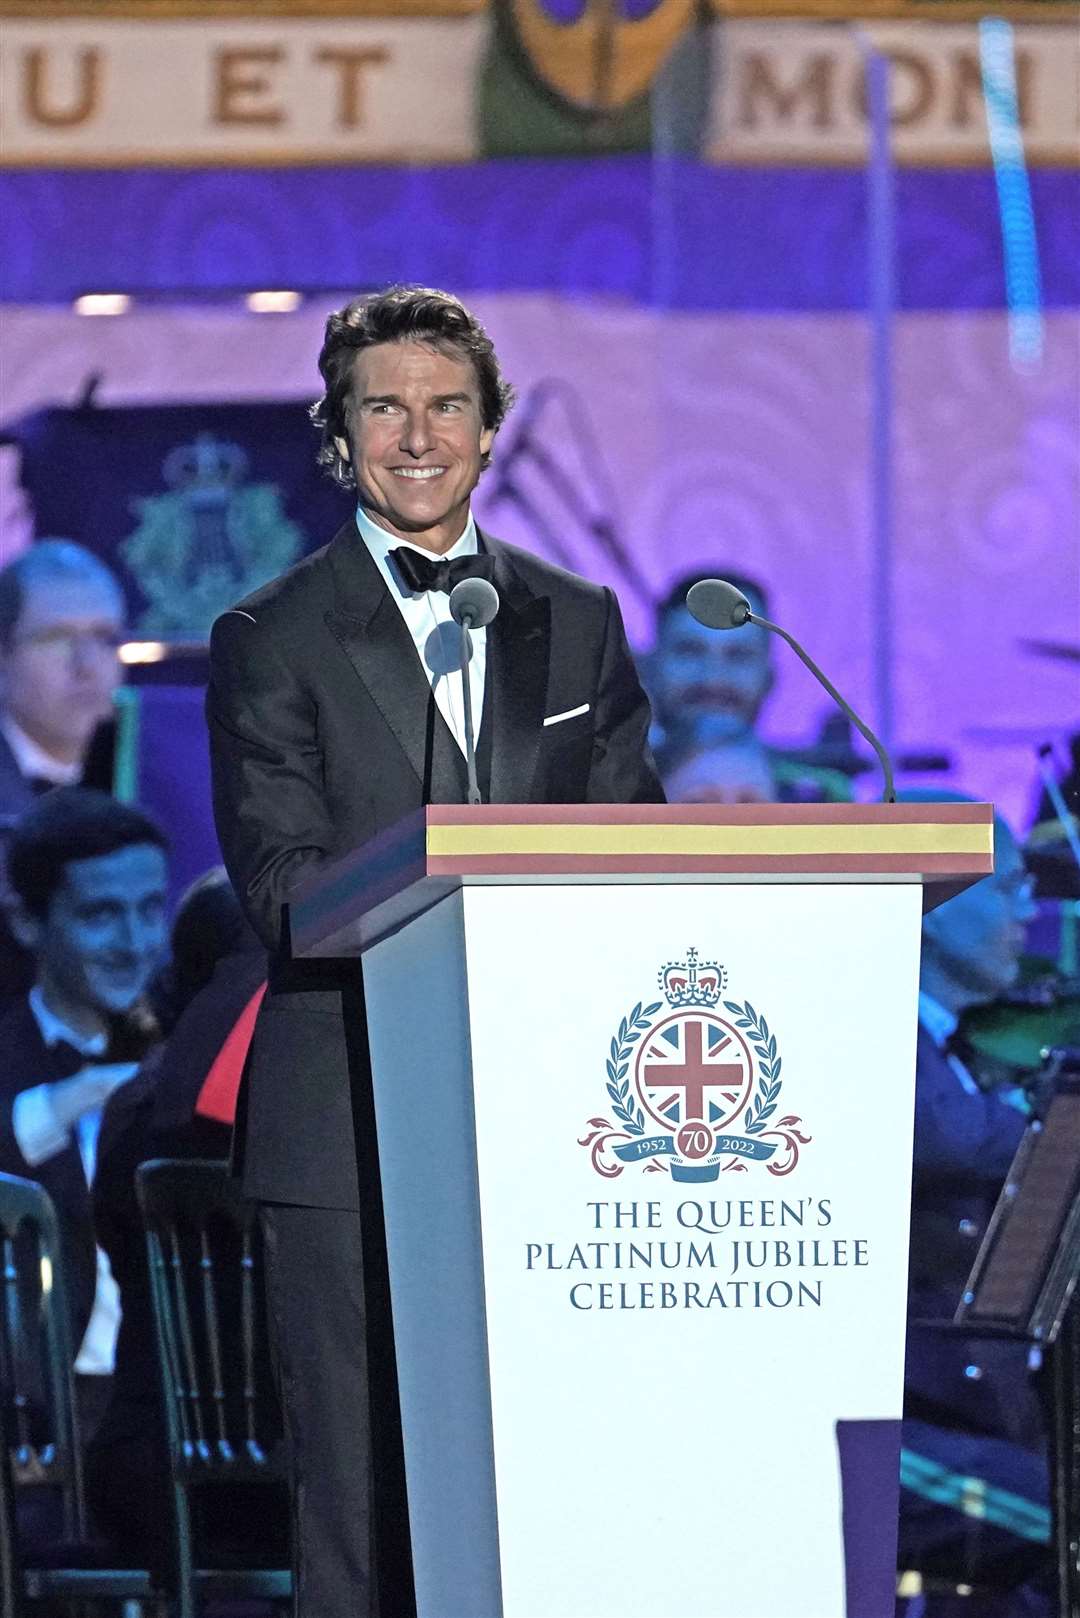 Tom Cruise during the A Gallop Through History Platinum Jubilee celebration (Steve Parsons/PA)